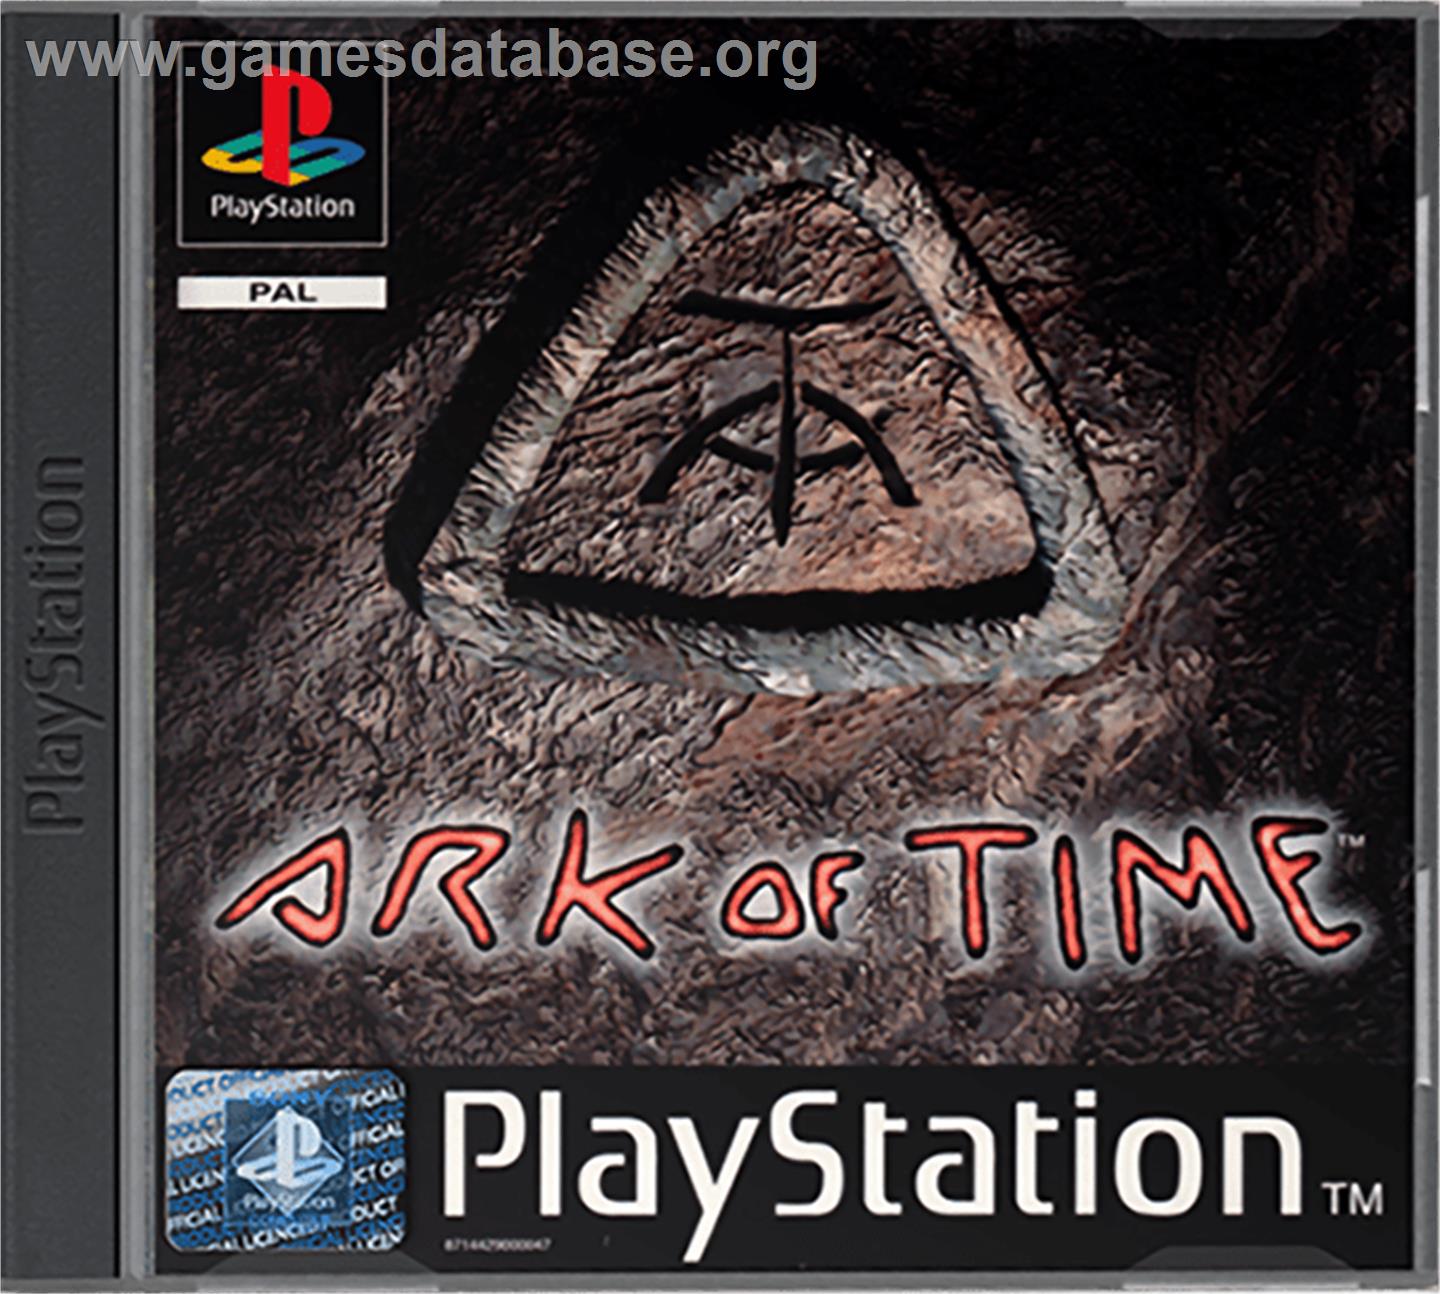 Ark of Time - Sony Playstation - Artwork - Box